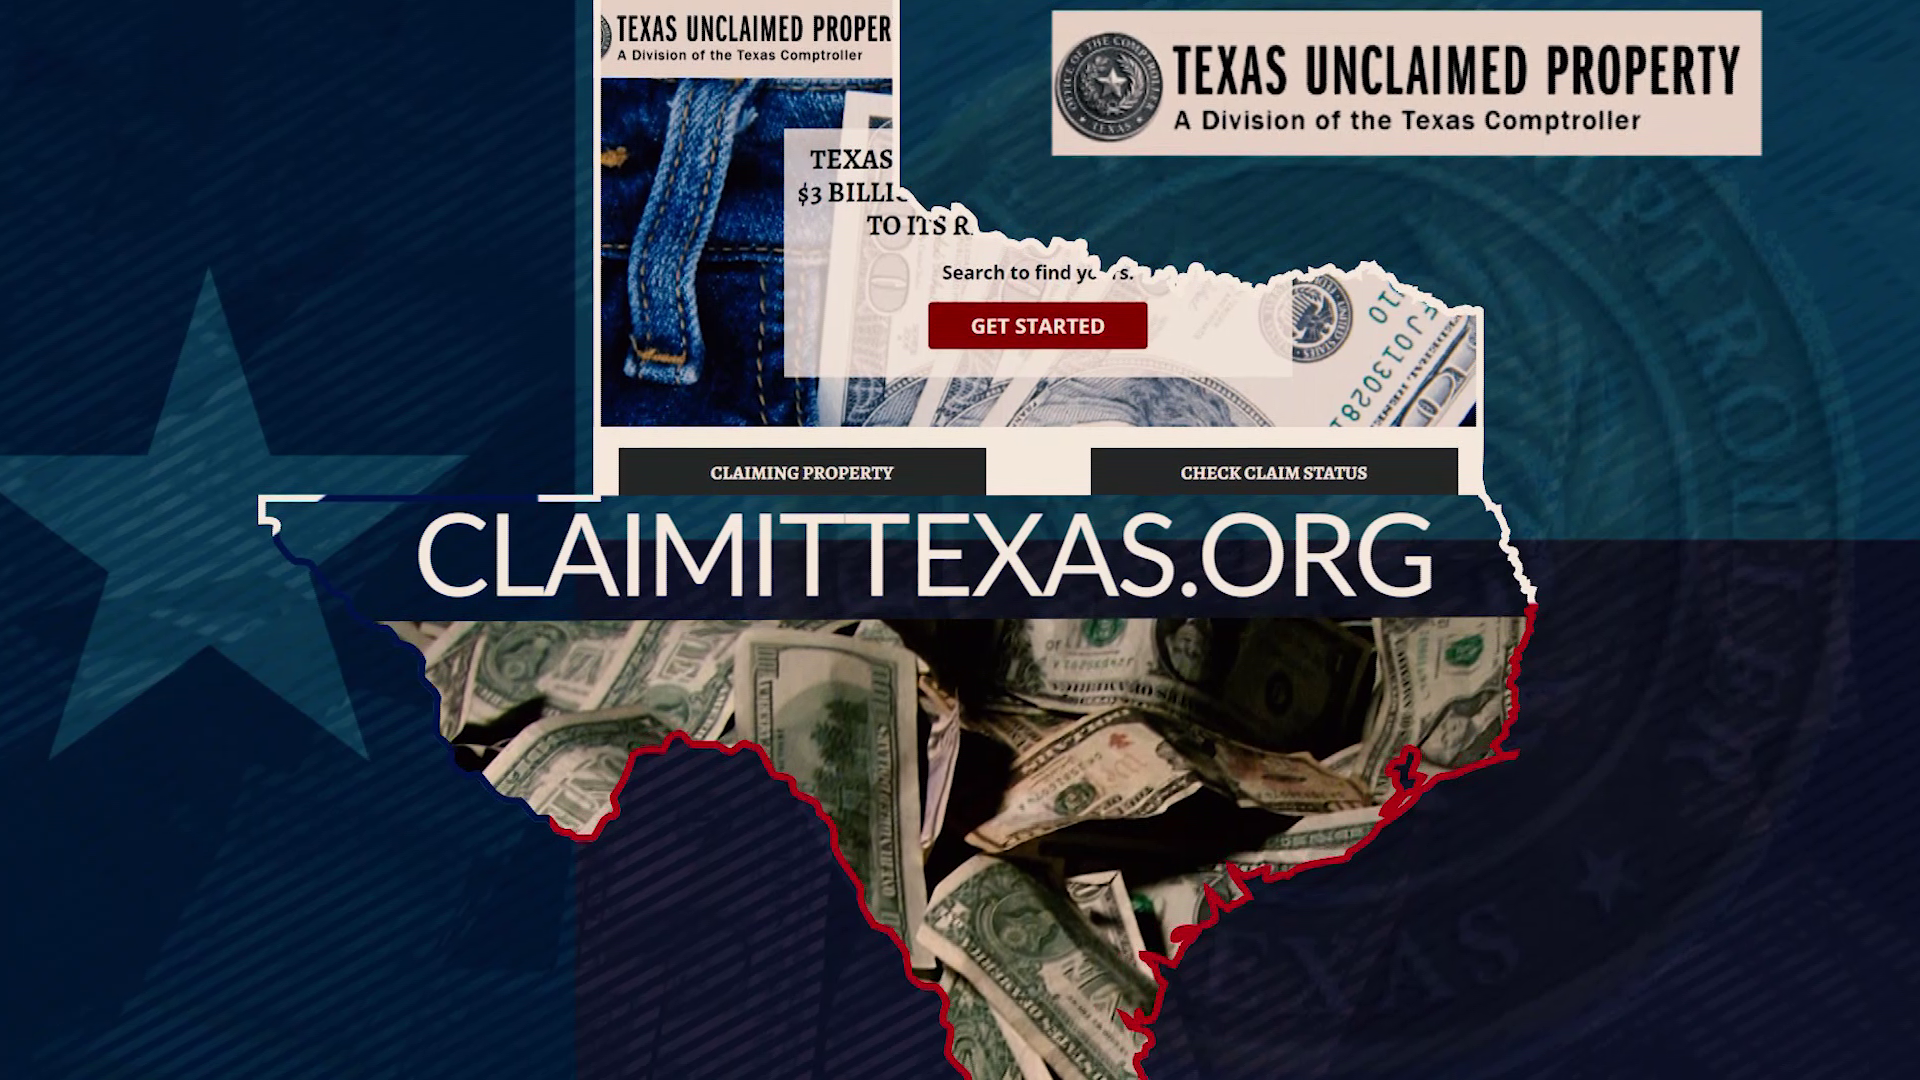 The state has a whopping $5.4 billion in unclaimed property. About $1 billion of that belongs to folks in the Houston area.